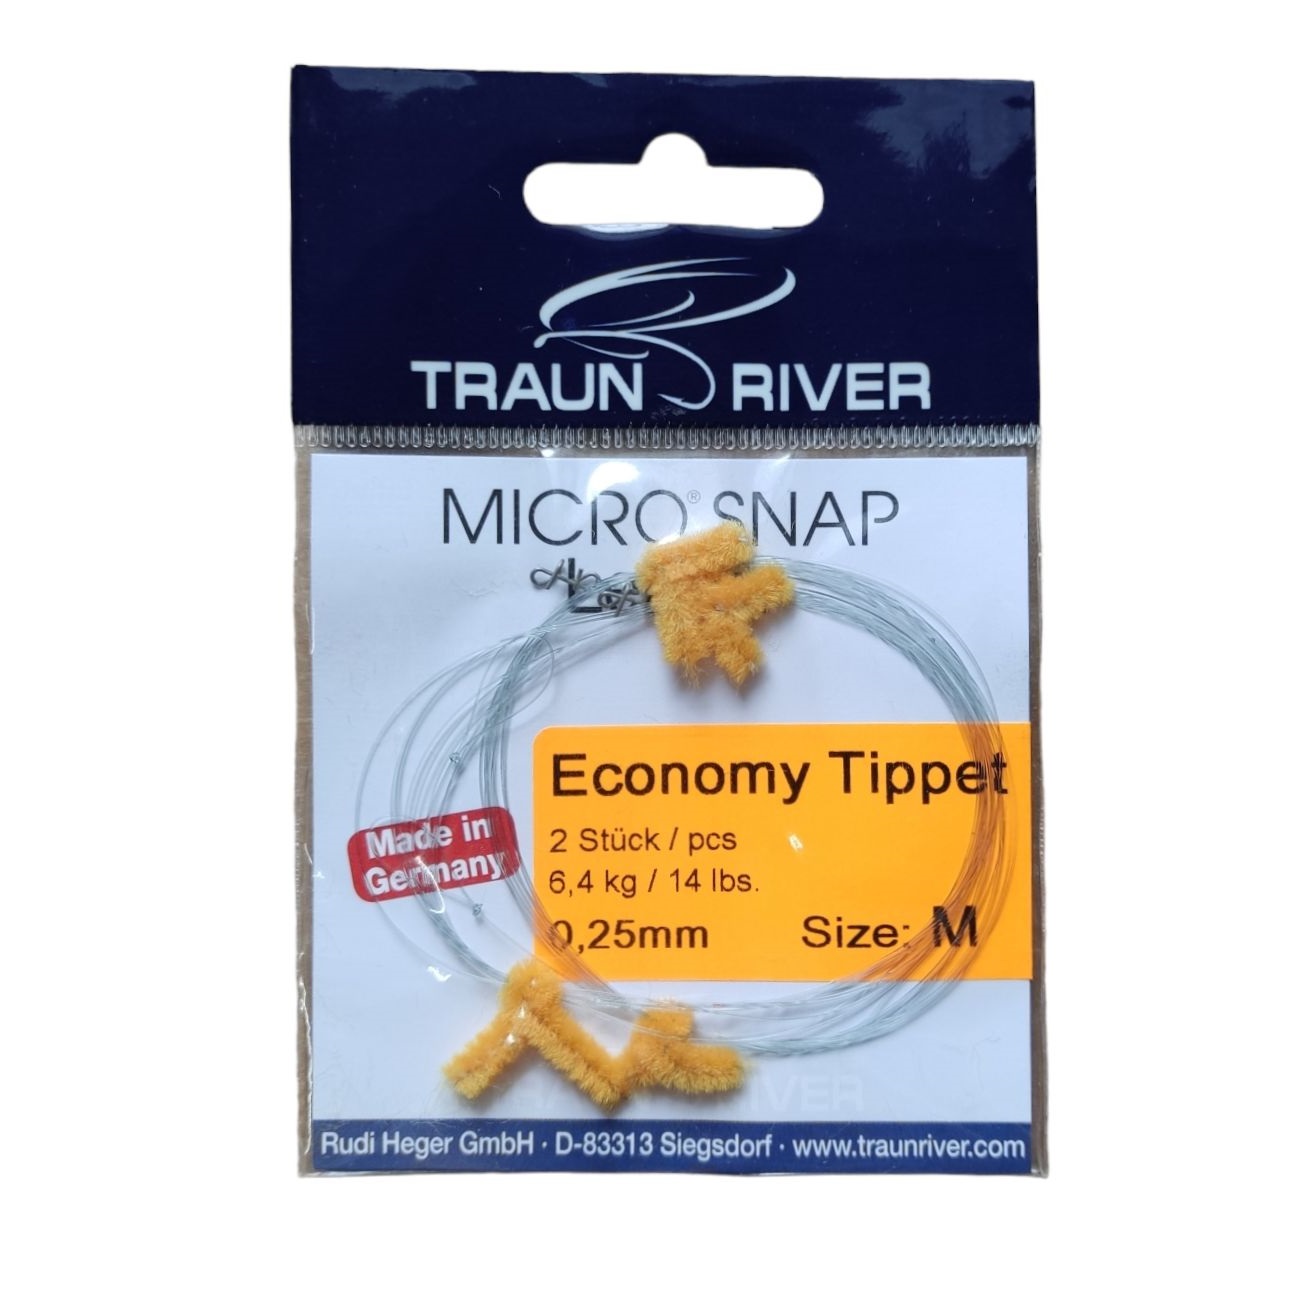 Micro Snap Economy Tippet (Pack of 2)